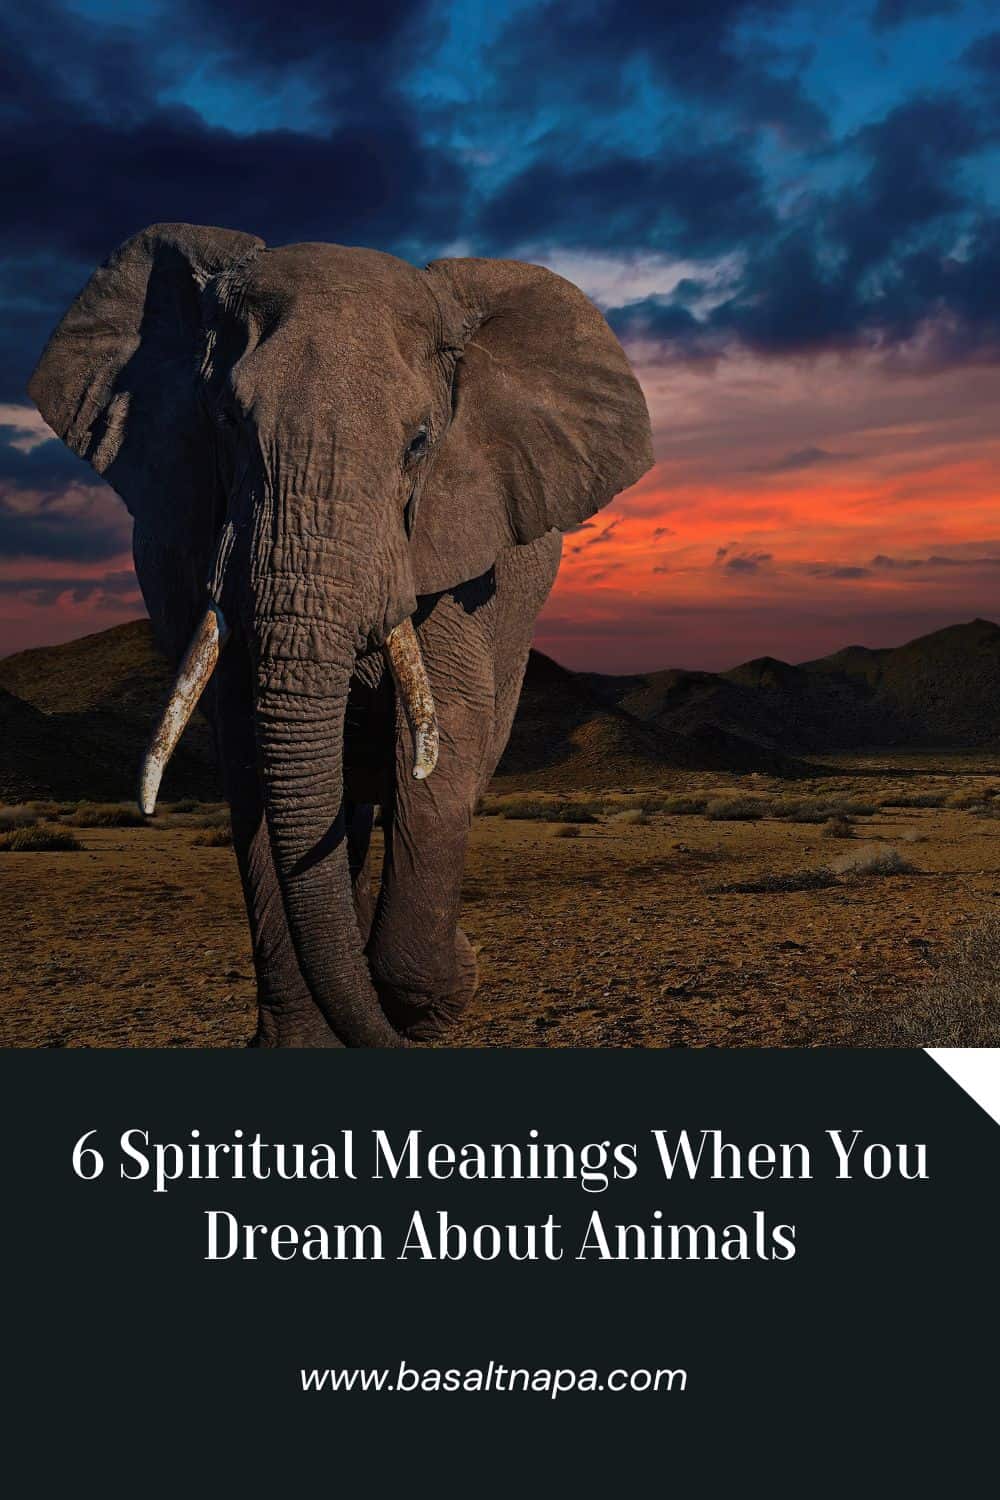 Animal Dreams and Spiritual Meanings